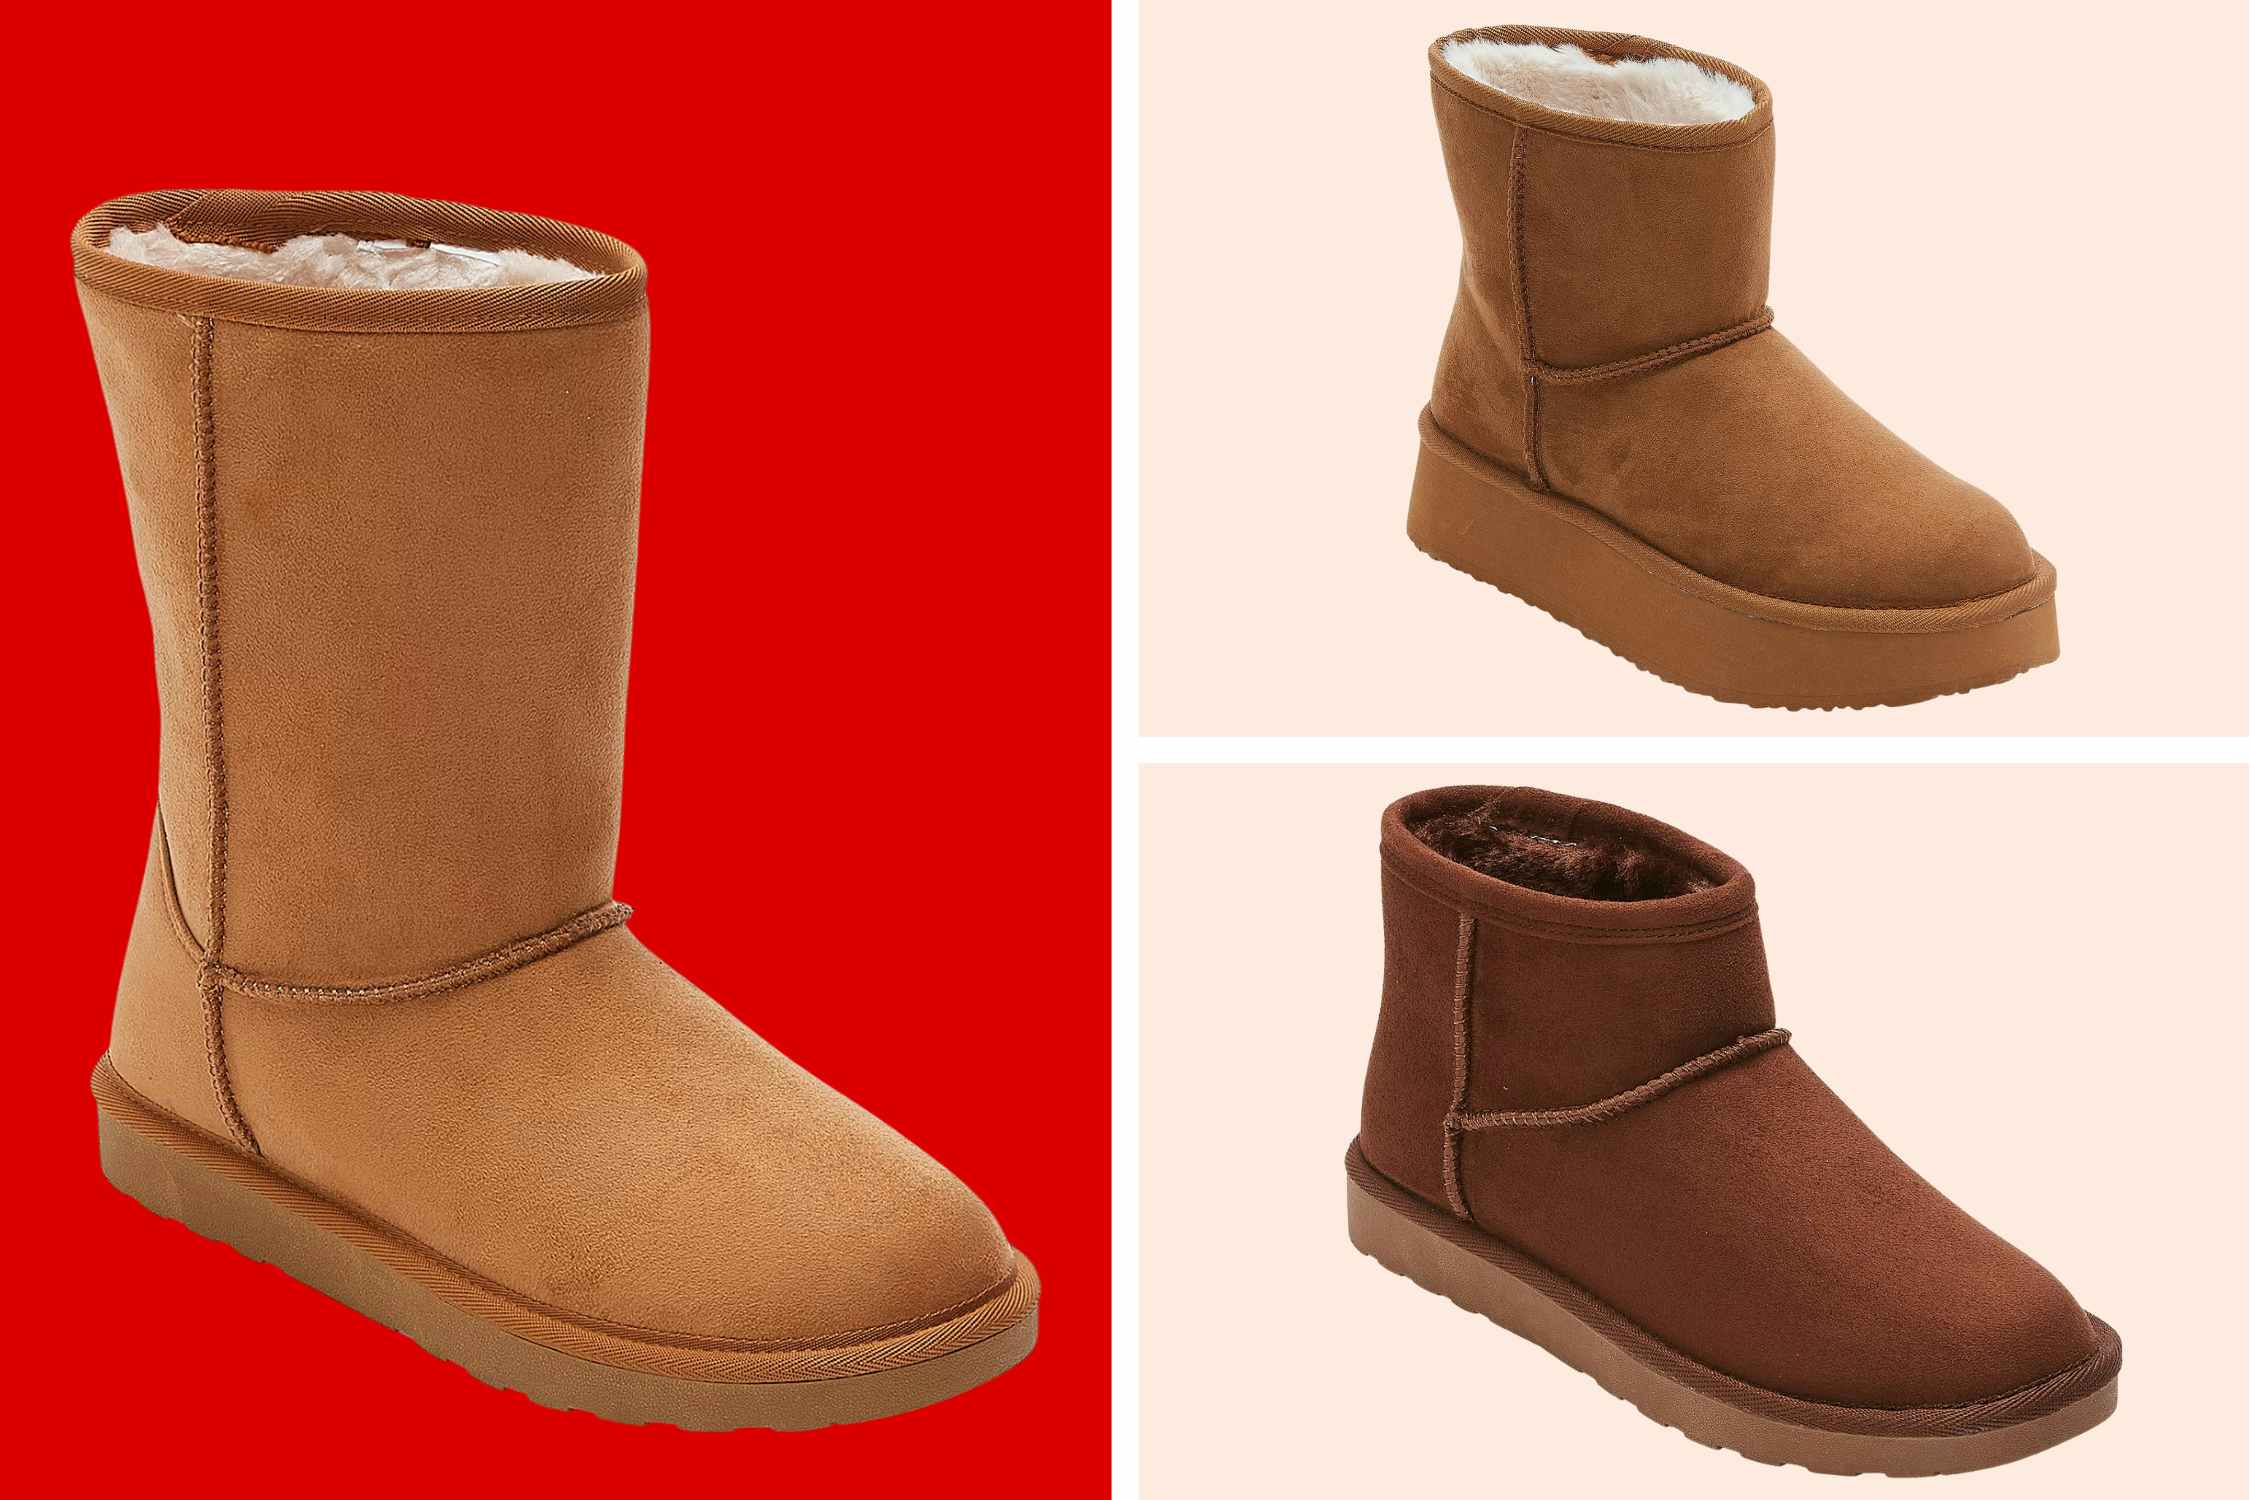 Arizona Women's Winter Boots, as Low as $12 at JCPenney (Reg. $60+)